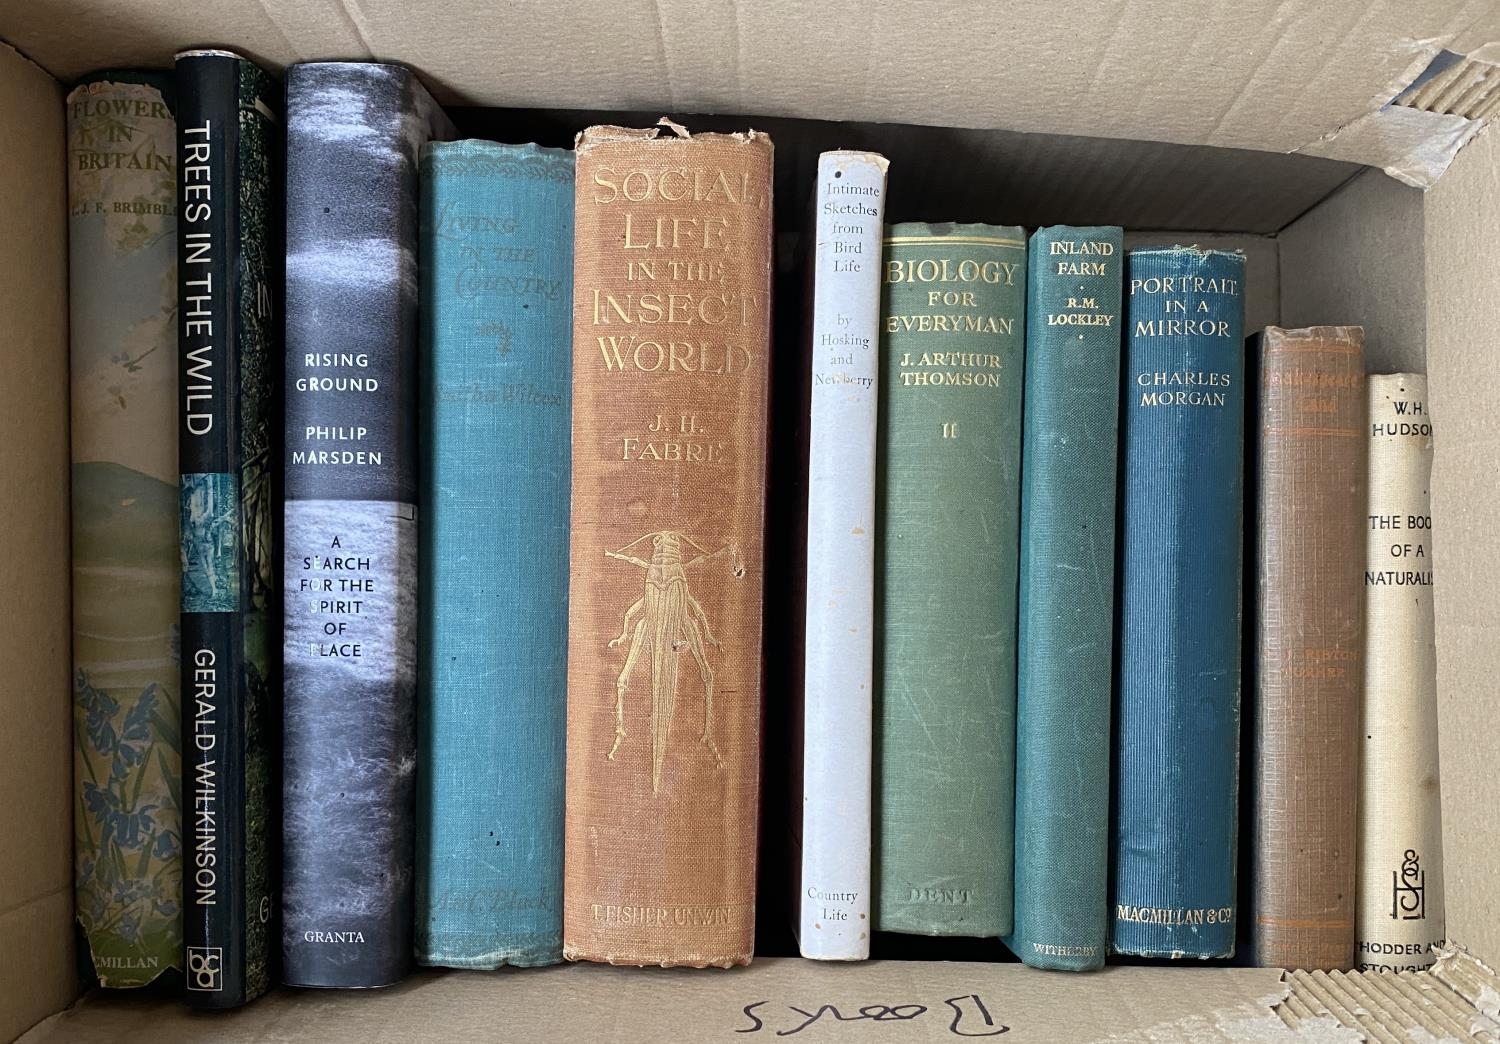 BOOKS, NATURE/NATURAL HISTORY. Some with good illus. Some vintage.